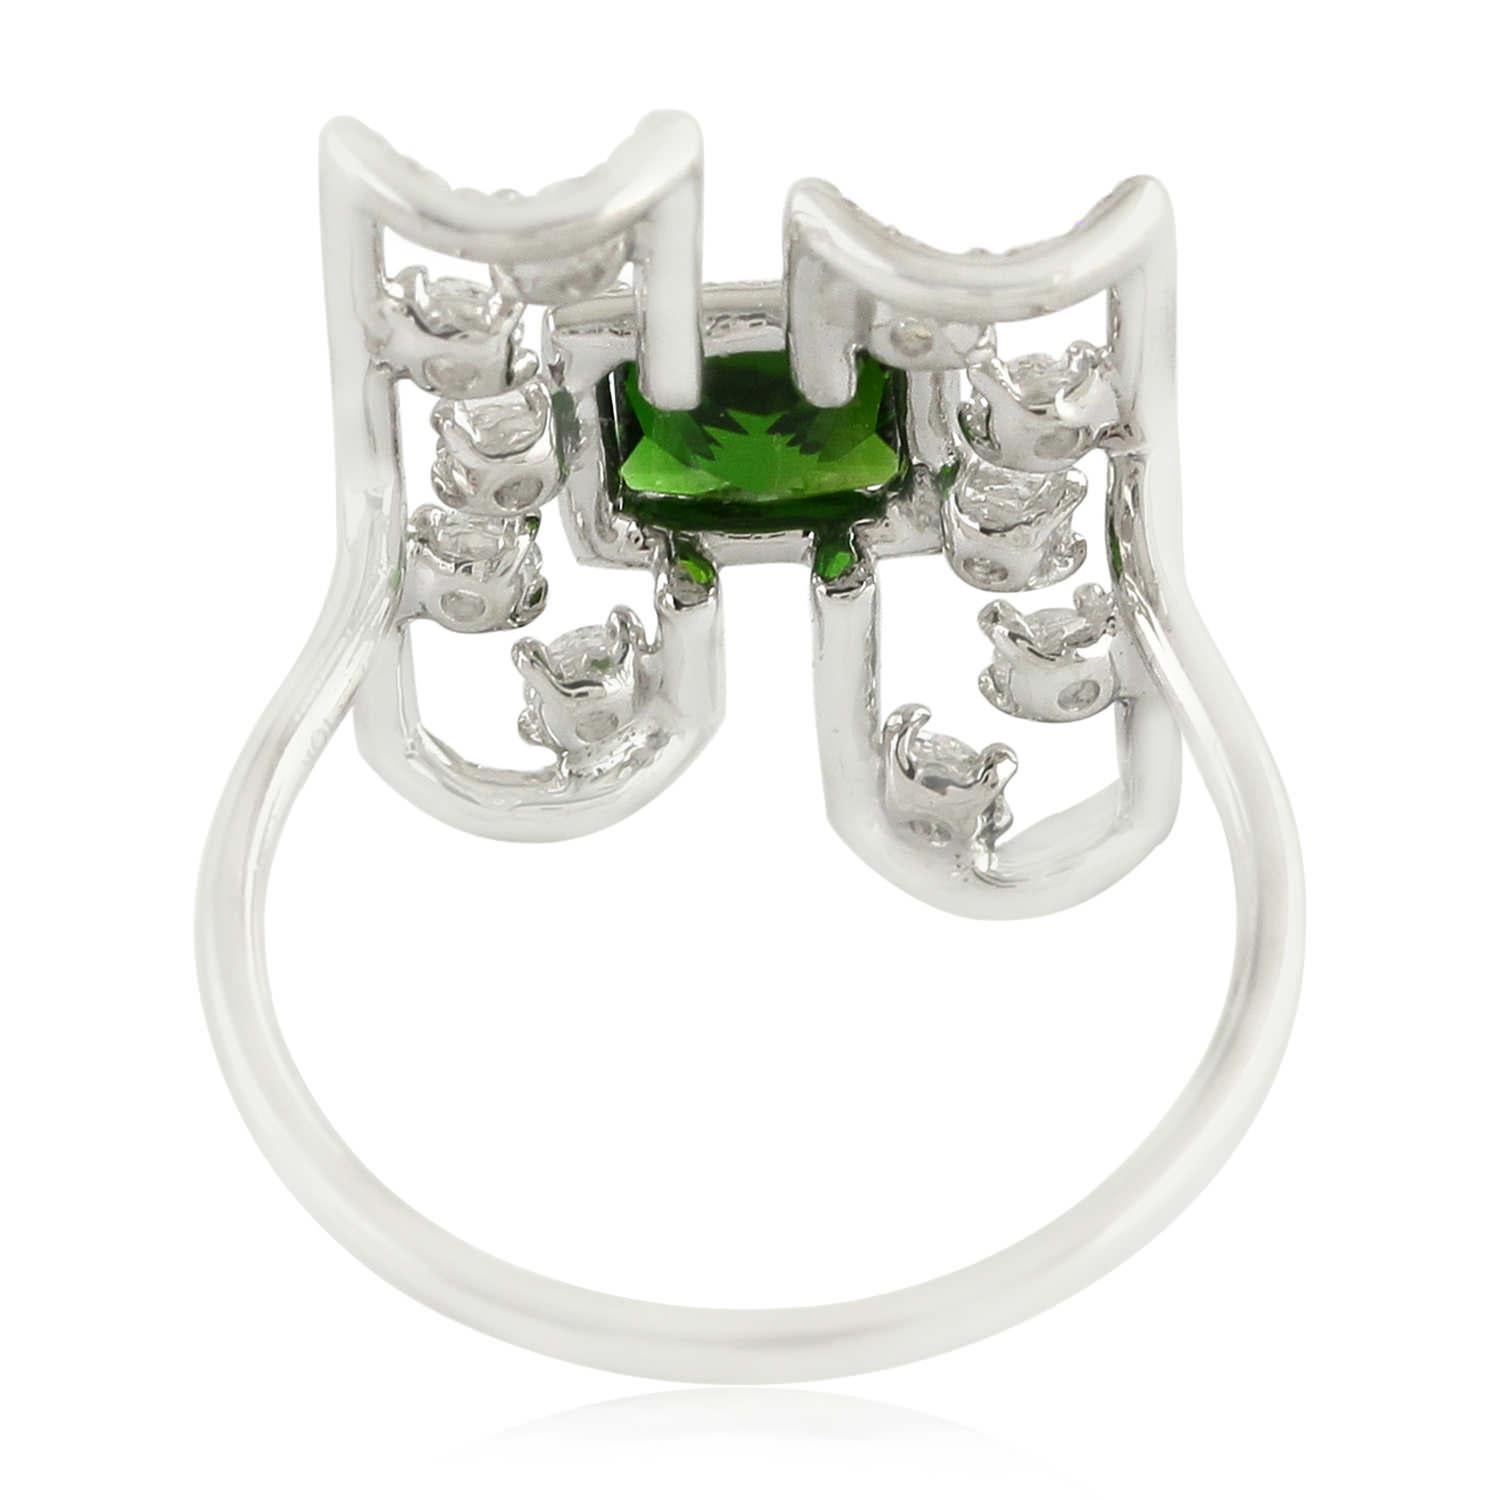 Contemporary Chrome Diopside Cocktail Ring With Diamonds Made In 18k White Gold For Sale